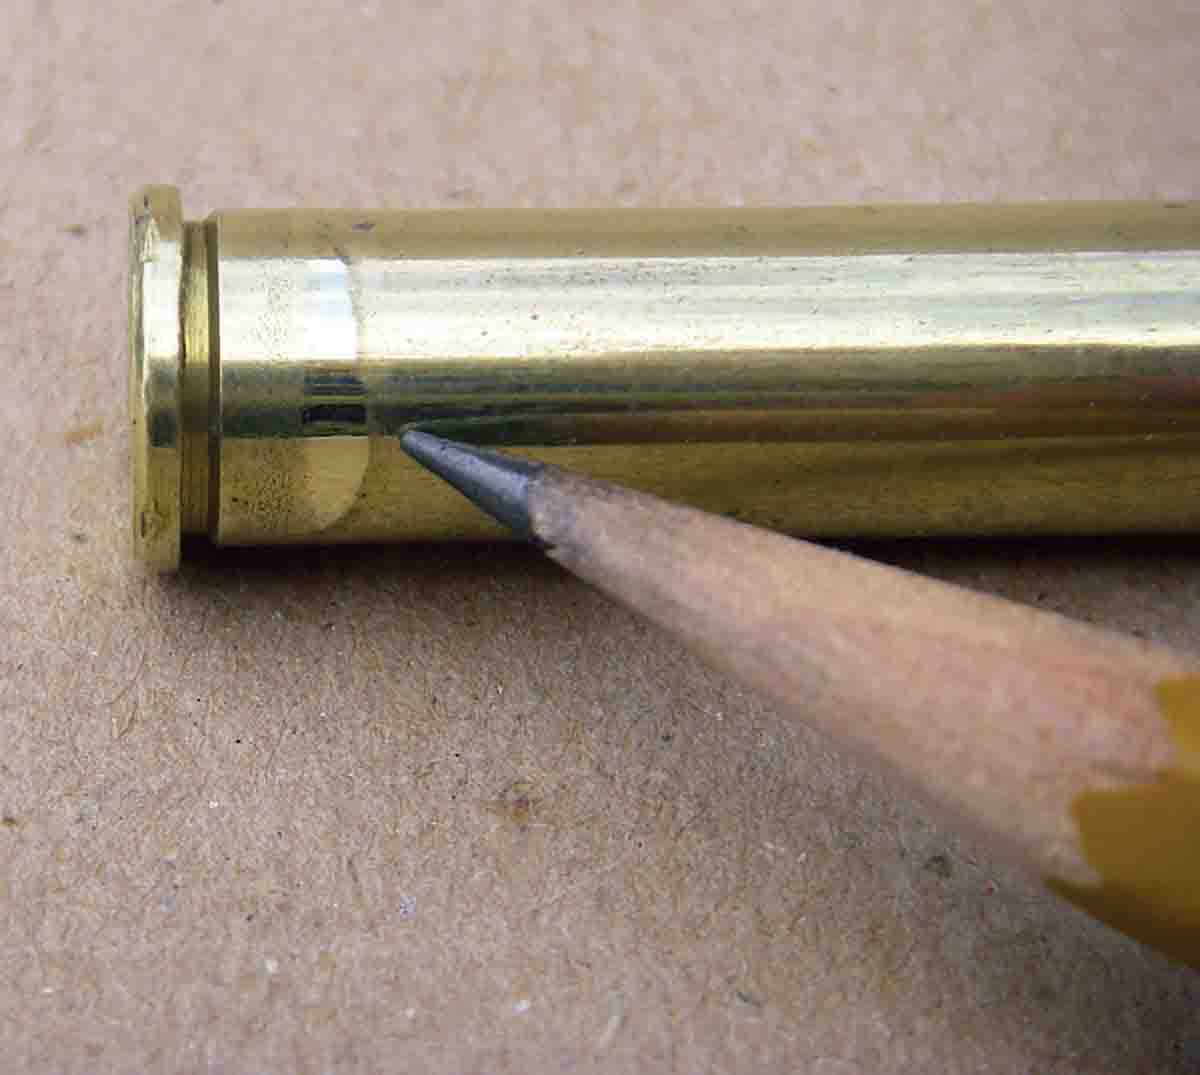 Some lever-action rifles feature a chamber with a bevel to facilitate feeding, which can leave a bulge just forward of the head. This must be removed to assure reliable chambering of handloaded cartridges.